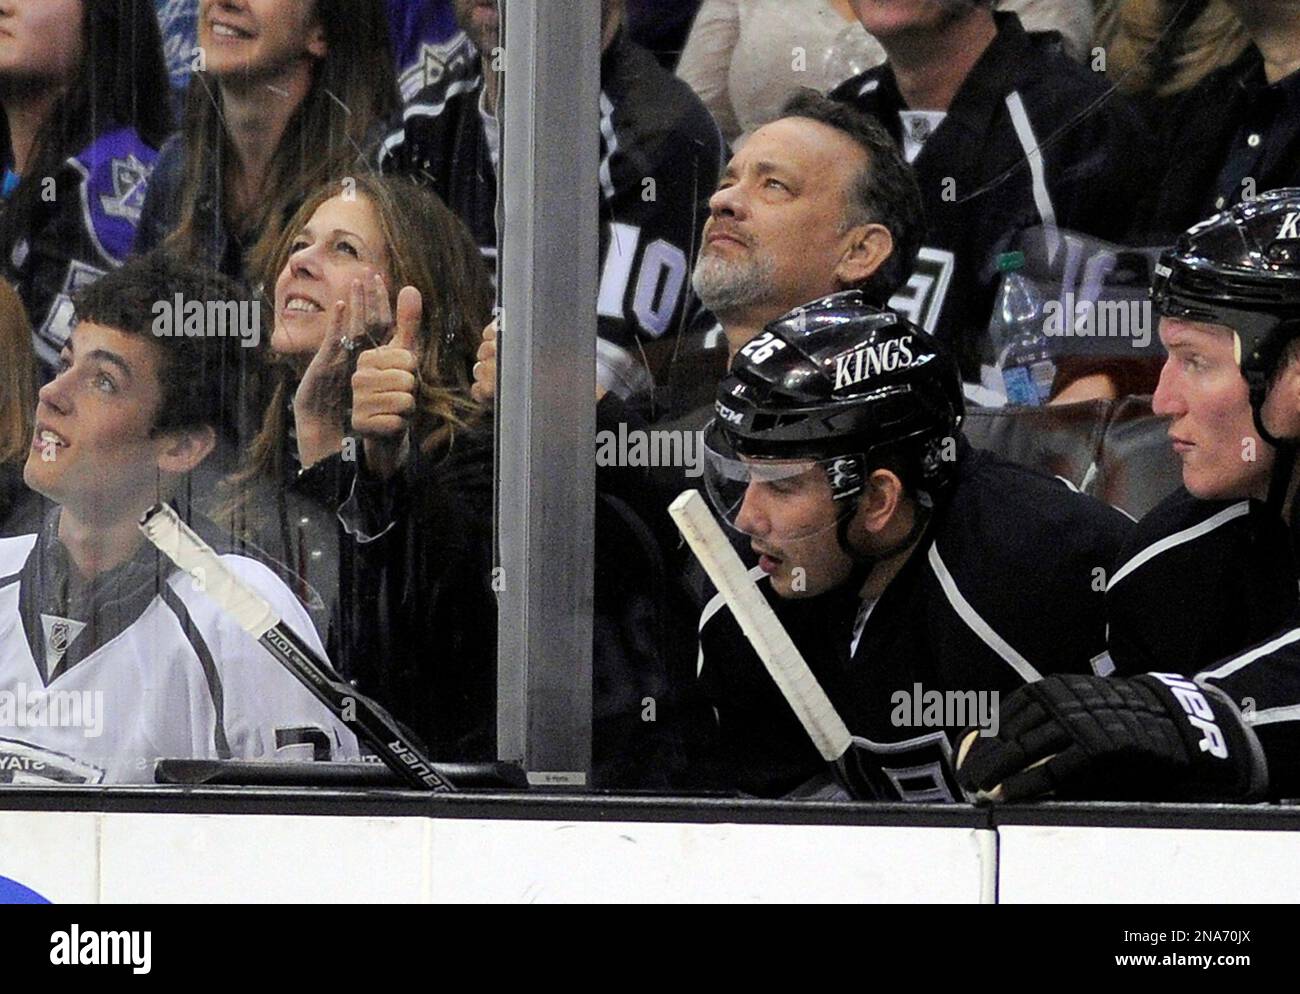 Actress Rita Wilson, second from left, and actor Tom Hanks watch the Los Angeles Kings play the Anaheim Ducks in their NHL hockey game, Saturday, March 3, 2012, in Los Angeles